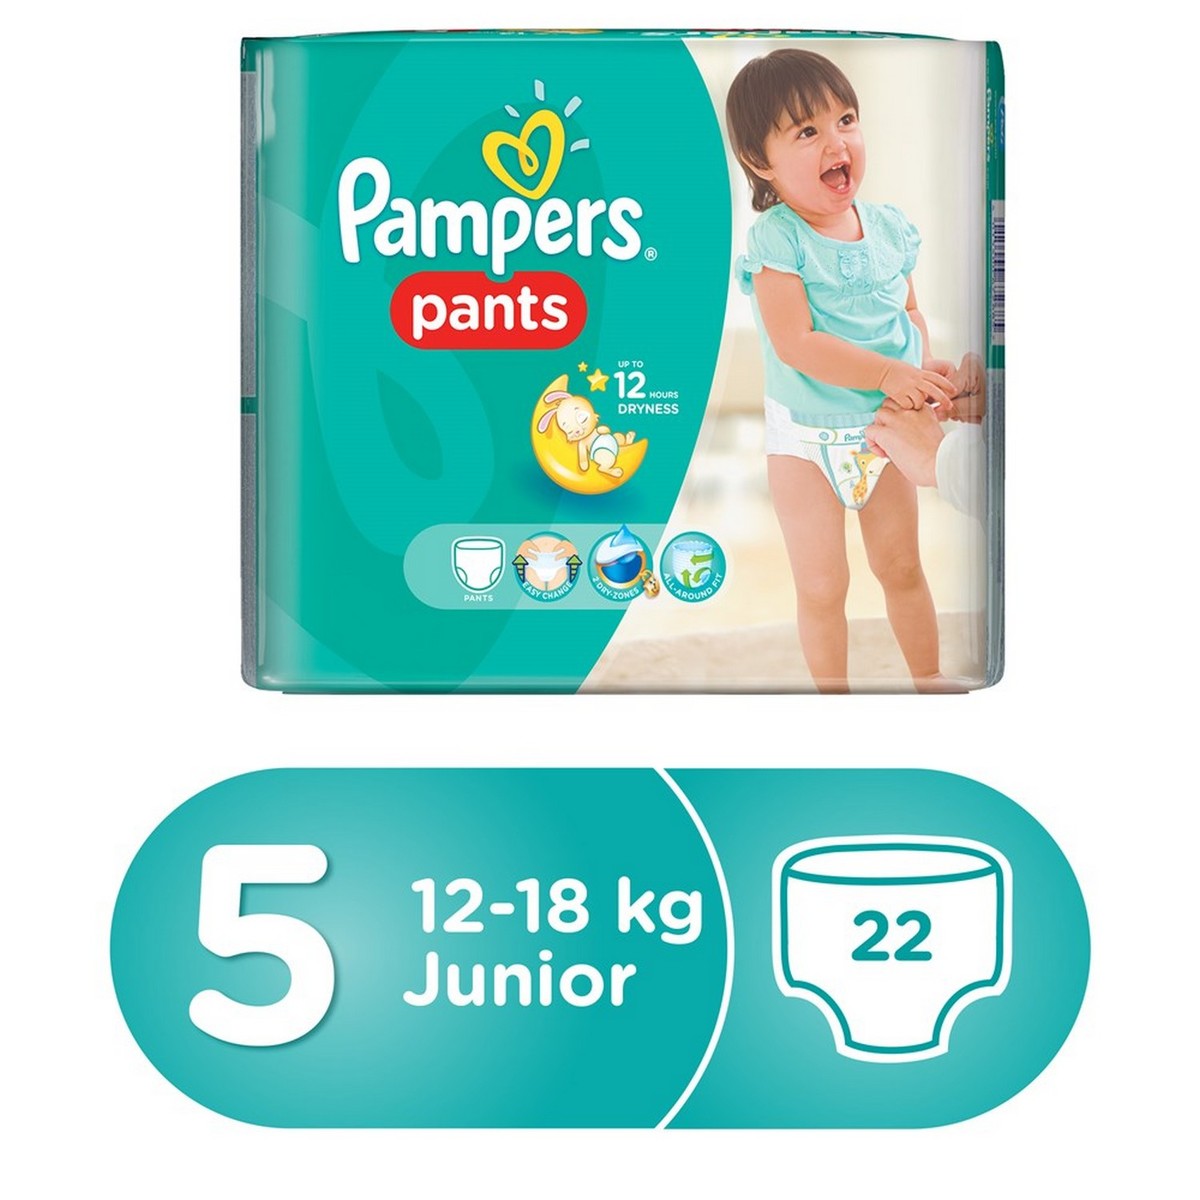 Pampers Pants Diapers Size 5 Junior 12-18kg Carry Pack 22 pcs